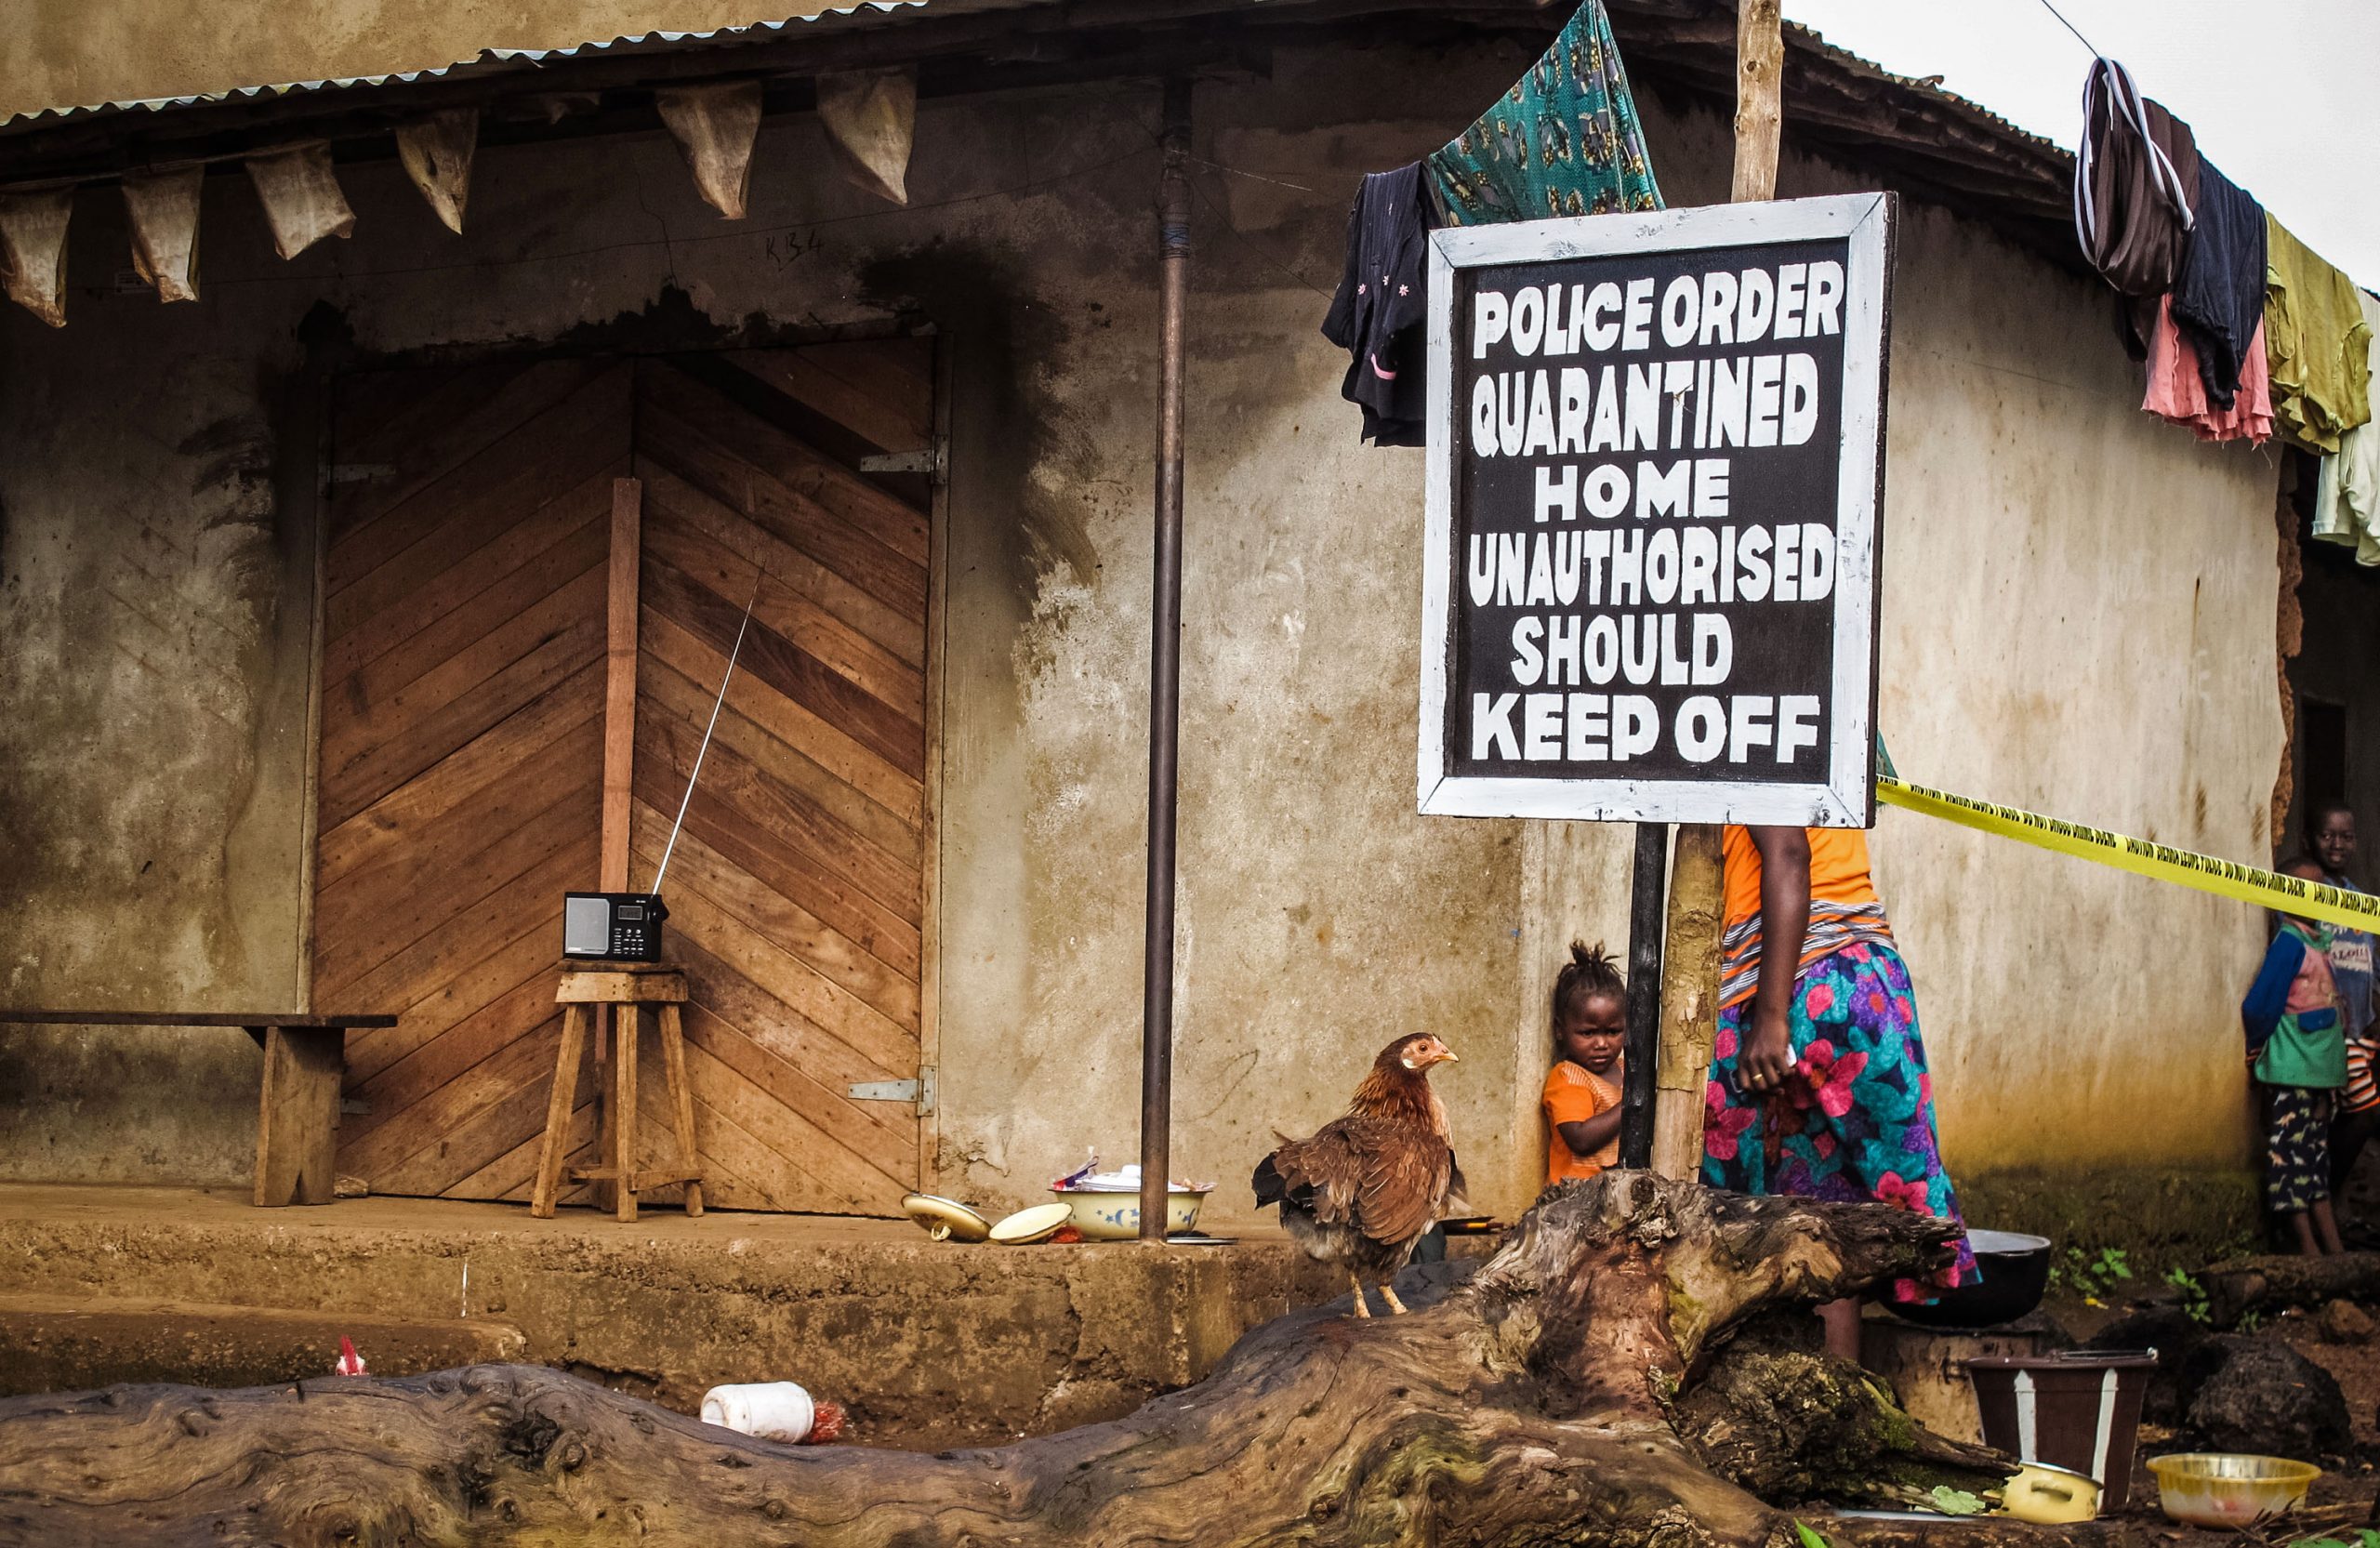 A young child with an adult and a rooster outside her home; a poster of police order quarantine warning outside the house.